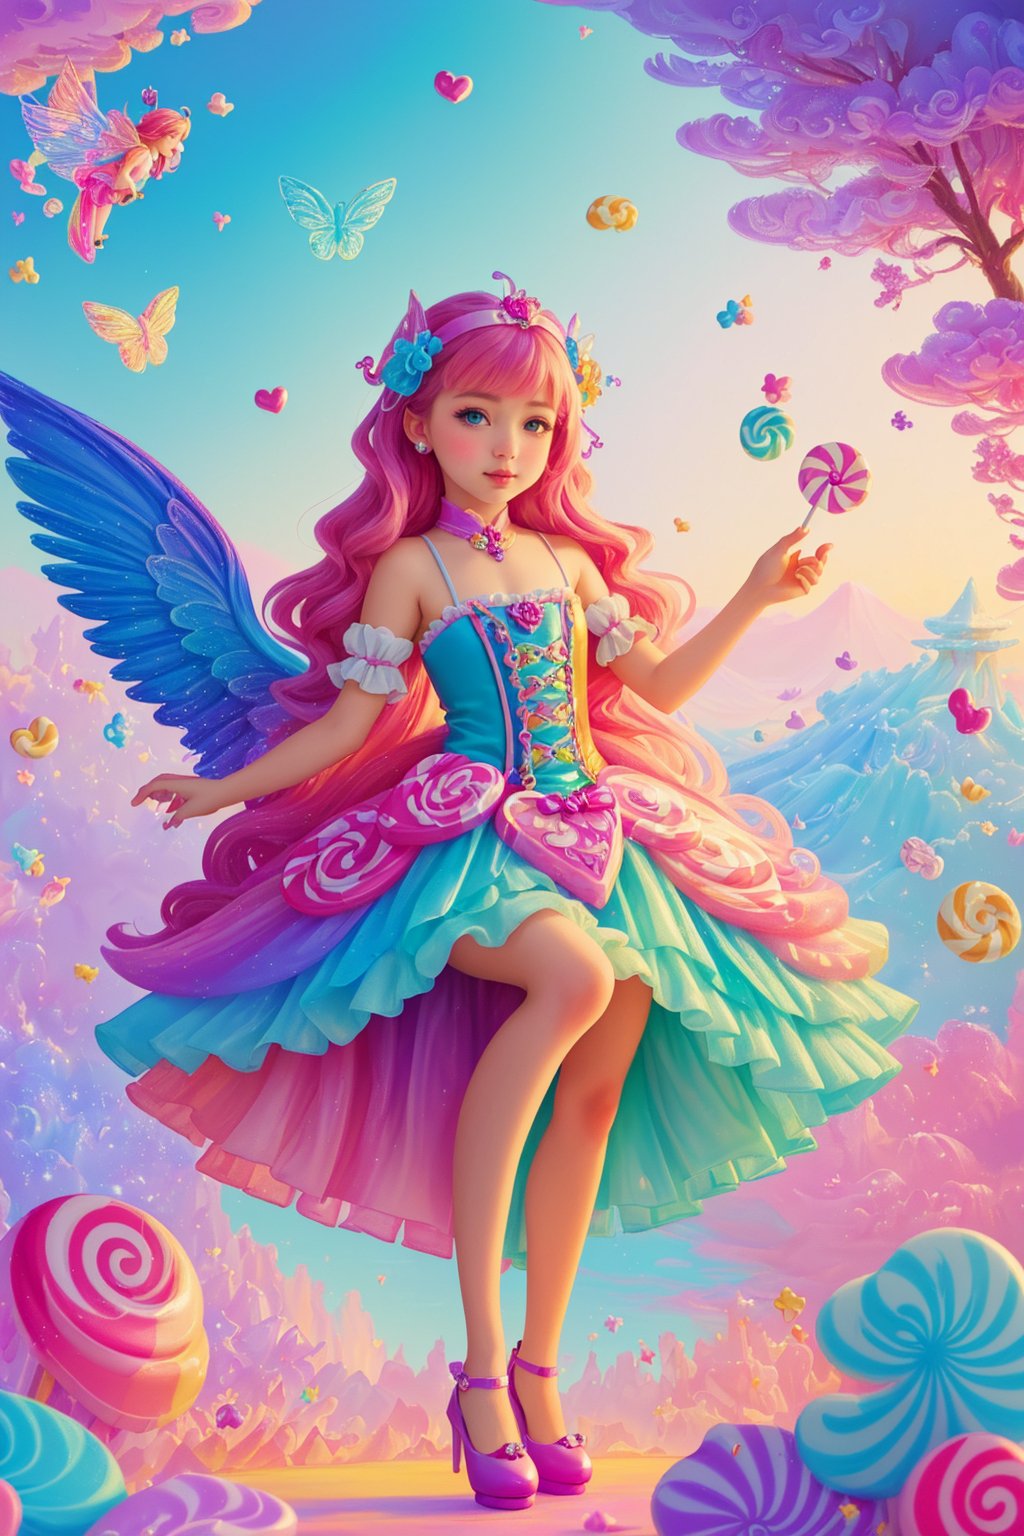 Digital Illustration, Artistic style, DeviantArt and Fantasy Art inspirations, (candy-themed art), (artistic interpretation:1.15), (candy dreams:1.18), (wide-angle view:1.12), (artistic composition:1.16), (vibrant candy colors:1.2), (dreamy motifs:1.18), (girl's whimsy:1.15), (whimsical view:1.12), (colorful vision:1.16), (fantasy aesthetics:1.2), (captivating artistry:1.18), (candy fantasy:1.15), (whimsical world:1.14), (sugar-coated wonderland:1.12), (mythical details:1.16)
